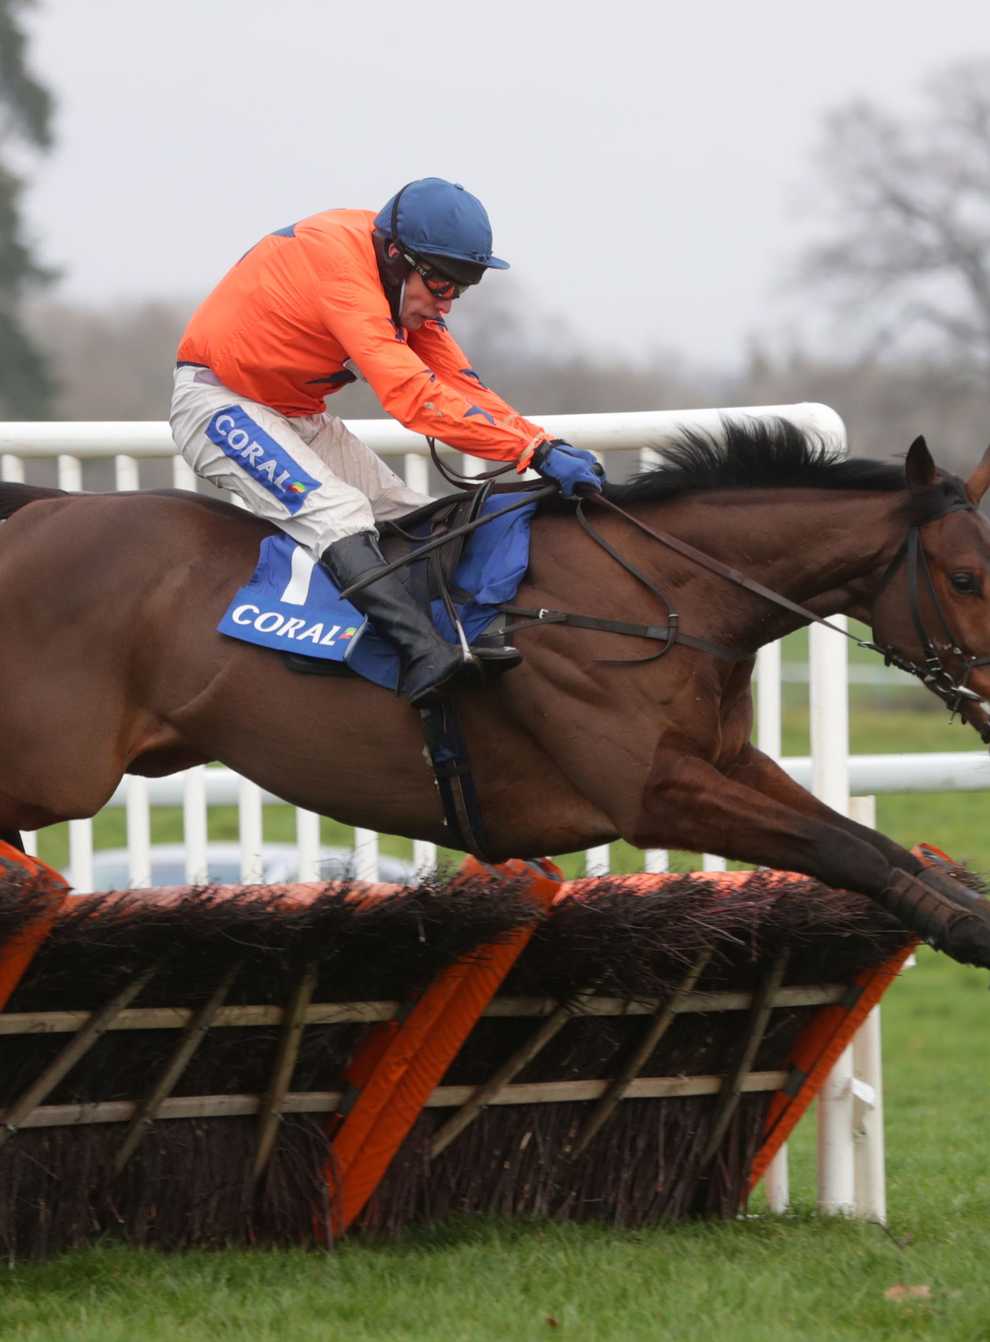 Adagio ridden by Tom Scudamore clears a fence before winning the Coral Finale Juvenile Hurdle during the Coral Welsh Grand National day at Chepstow Racecourse (David Davies/PA)